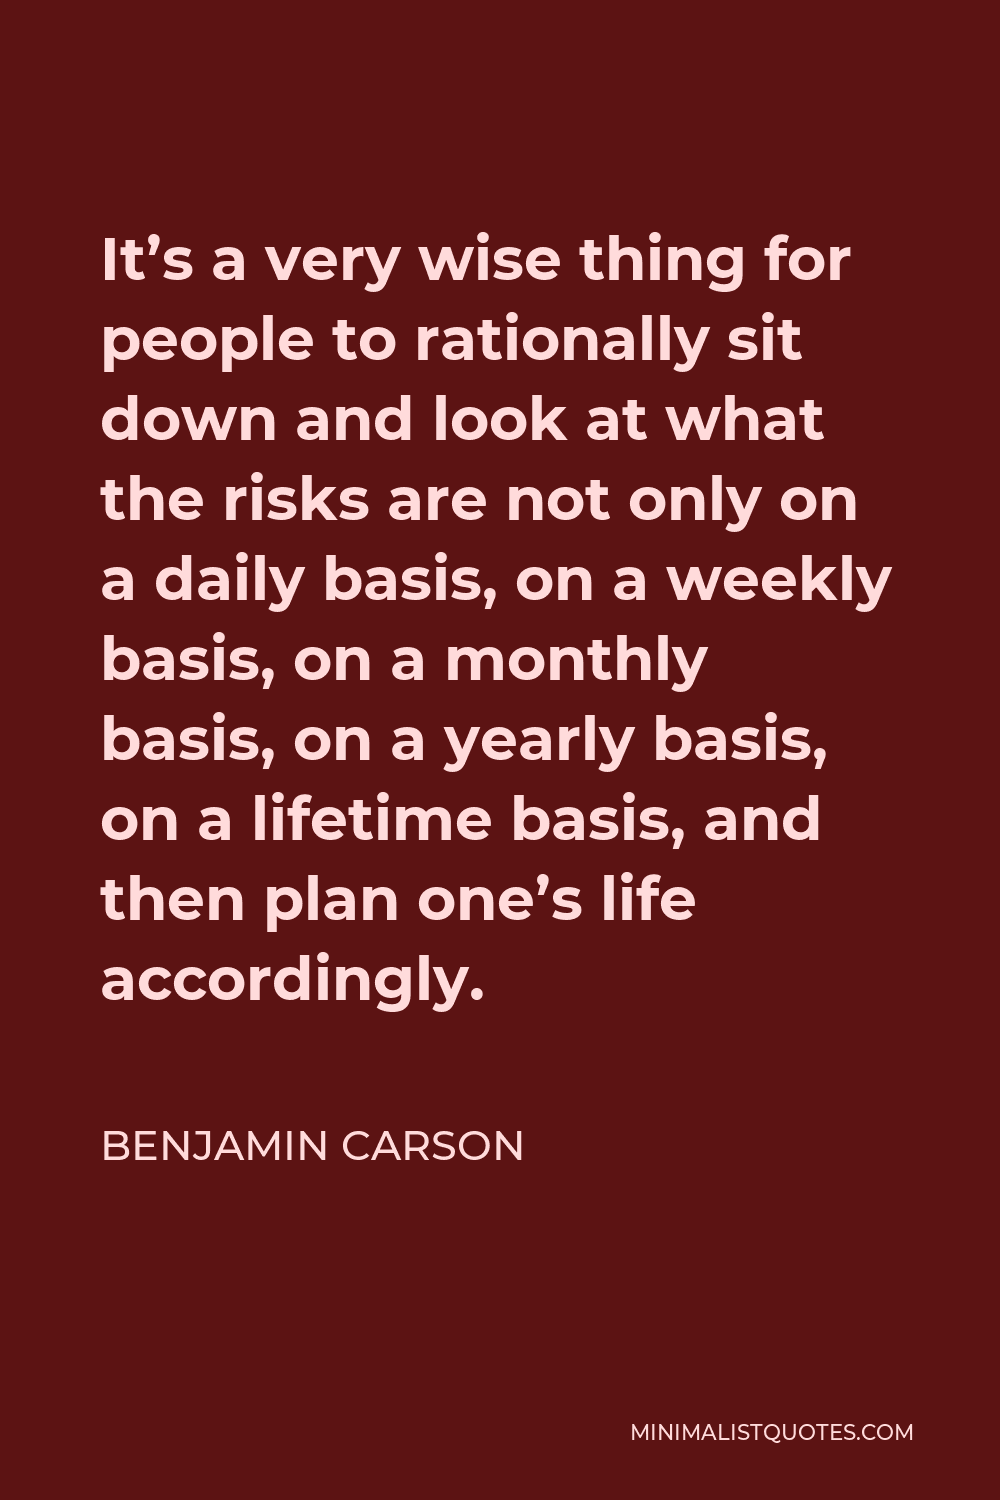 Benjamin Carson Quote - It’s a very wise thing for people to rationally sit down and look at what the risks are not only on a daily basis, on a weekly basis, on a monthly basis, on a yearly basis, on a lifetime basis, and then plan one’s life accordingly.